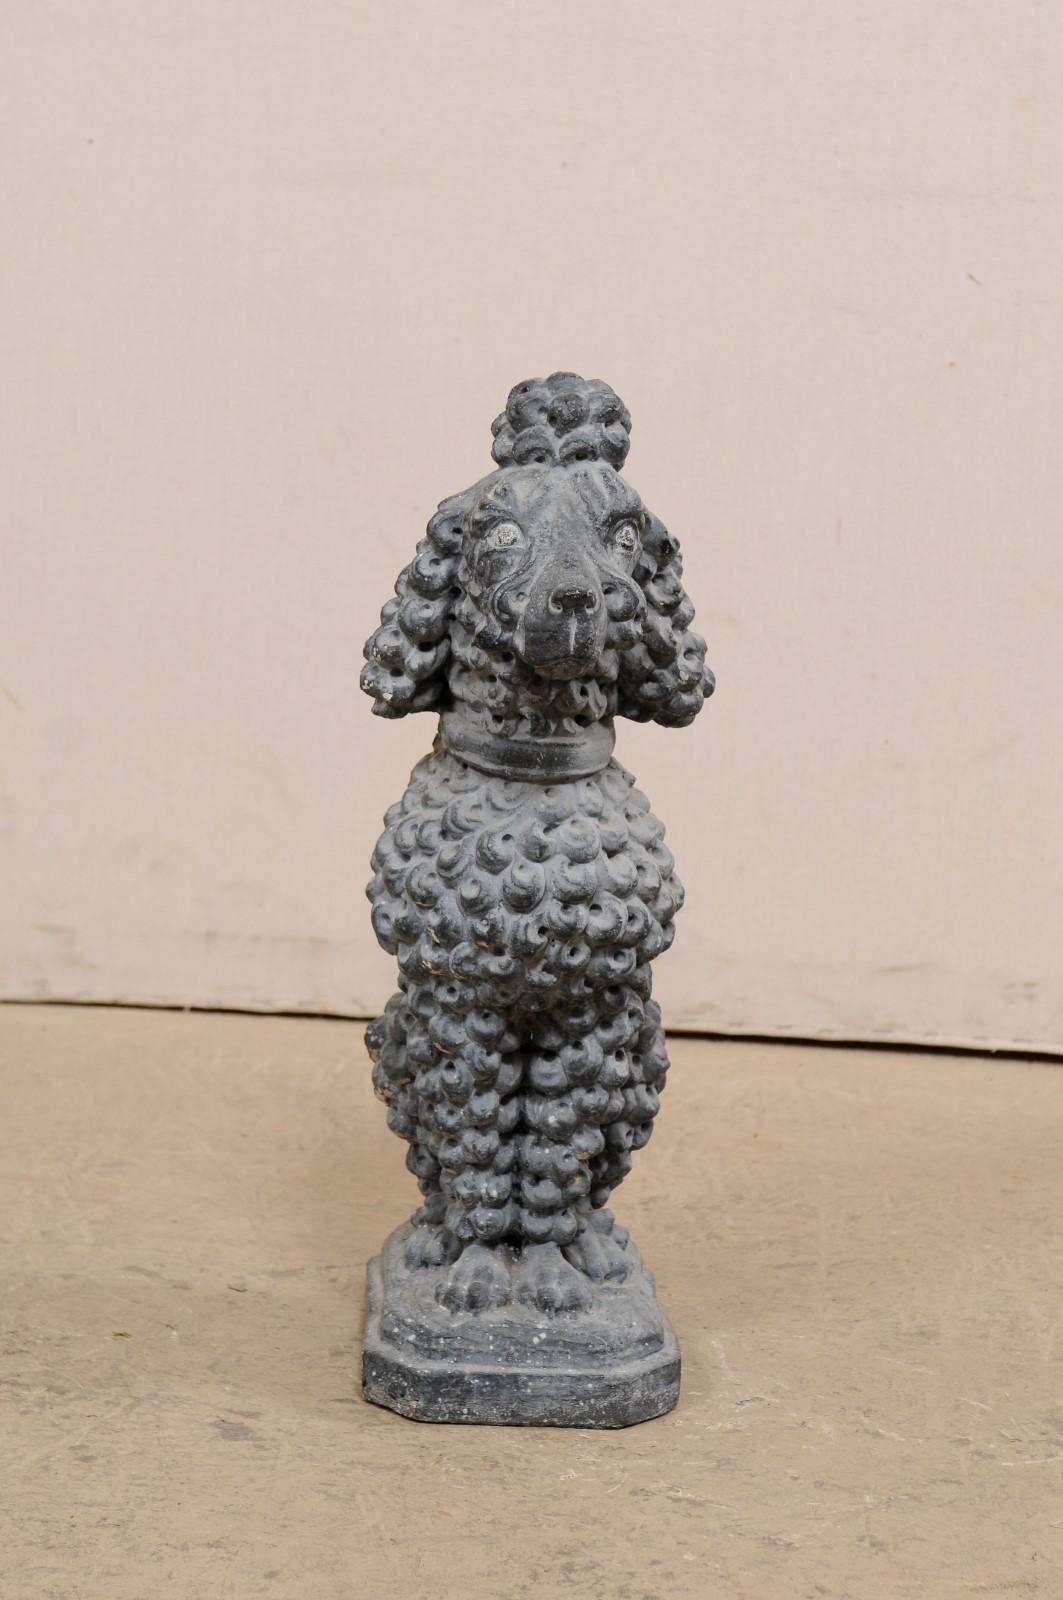 A French vintage cast stone poodle statue. This sweet little dog statue from France, created of cast stone, depicts a poodle in seated position, looking straight ahead, face expressive and alert, with it's nicely quaffed haircut and pom-pom adorning